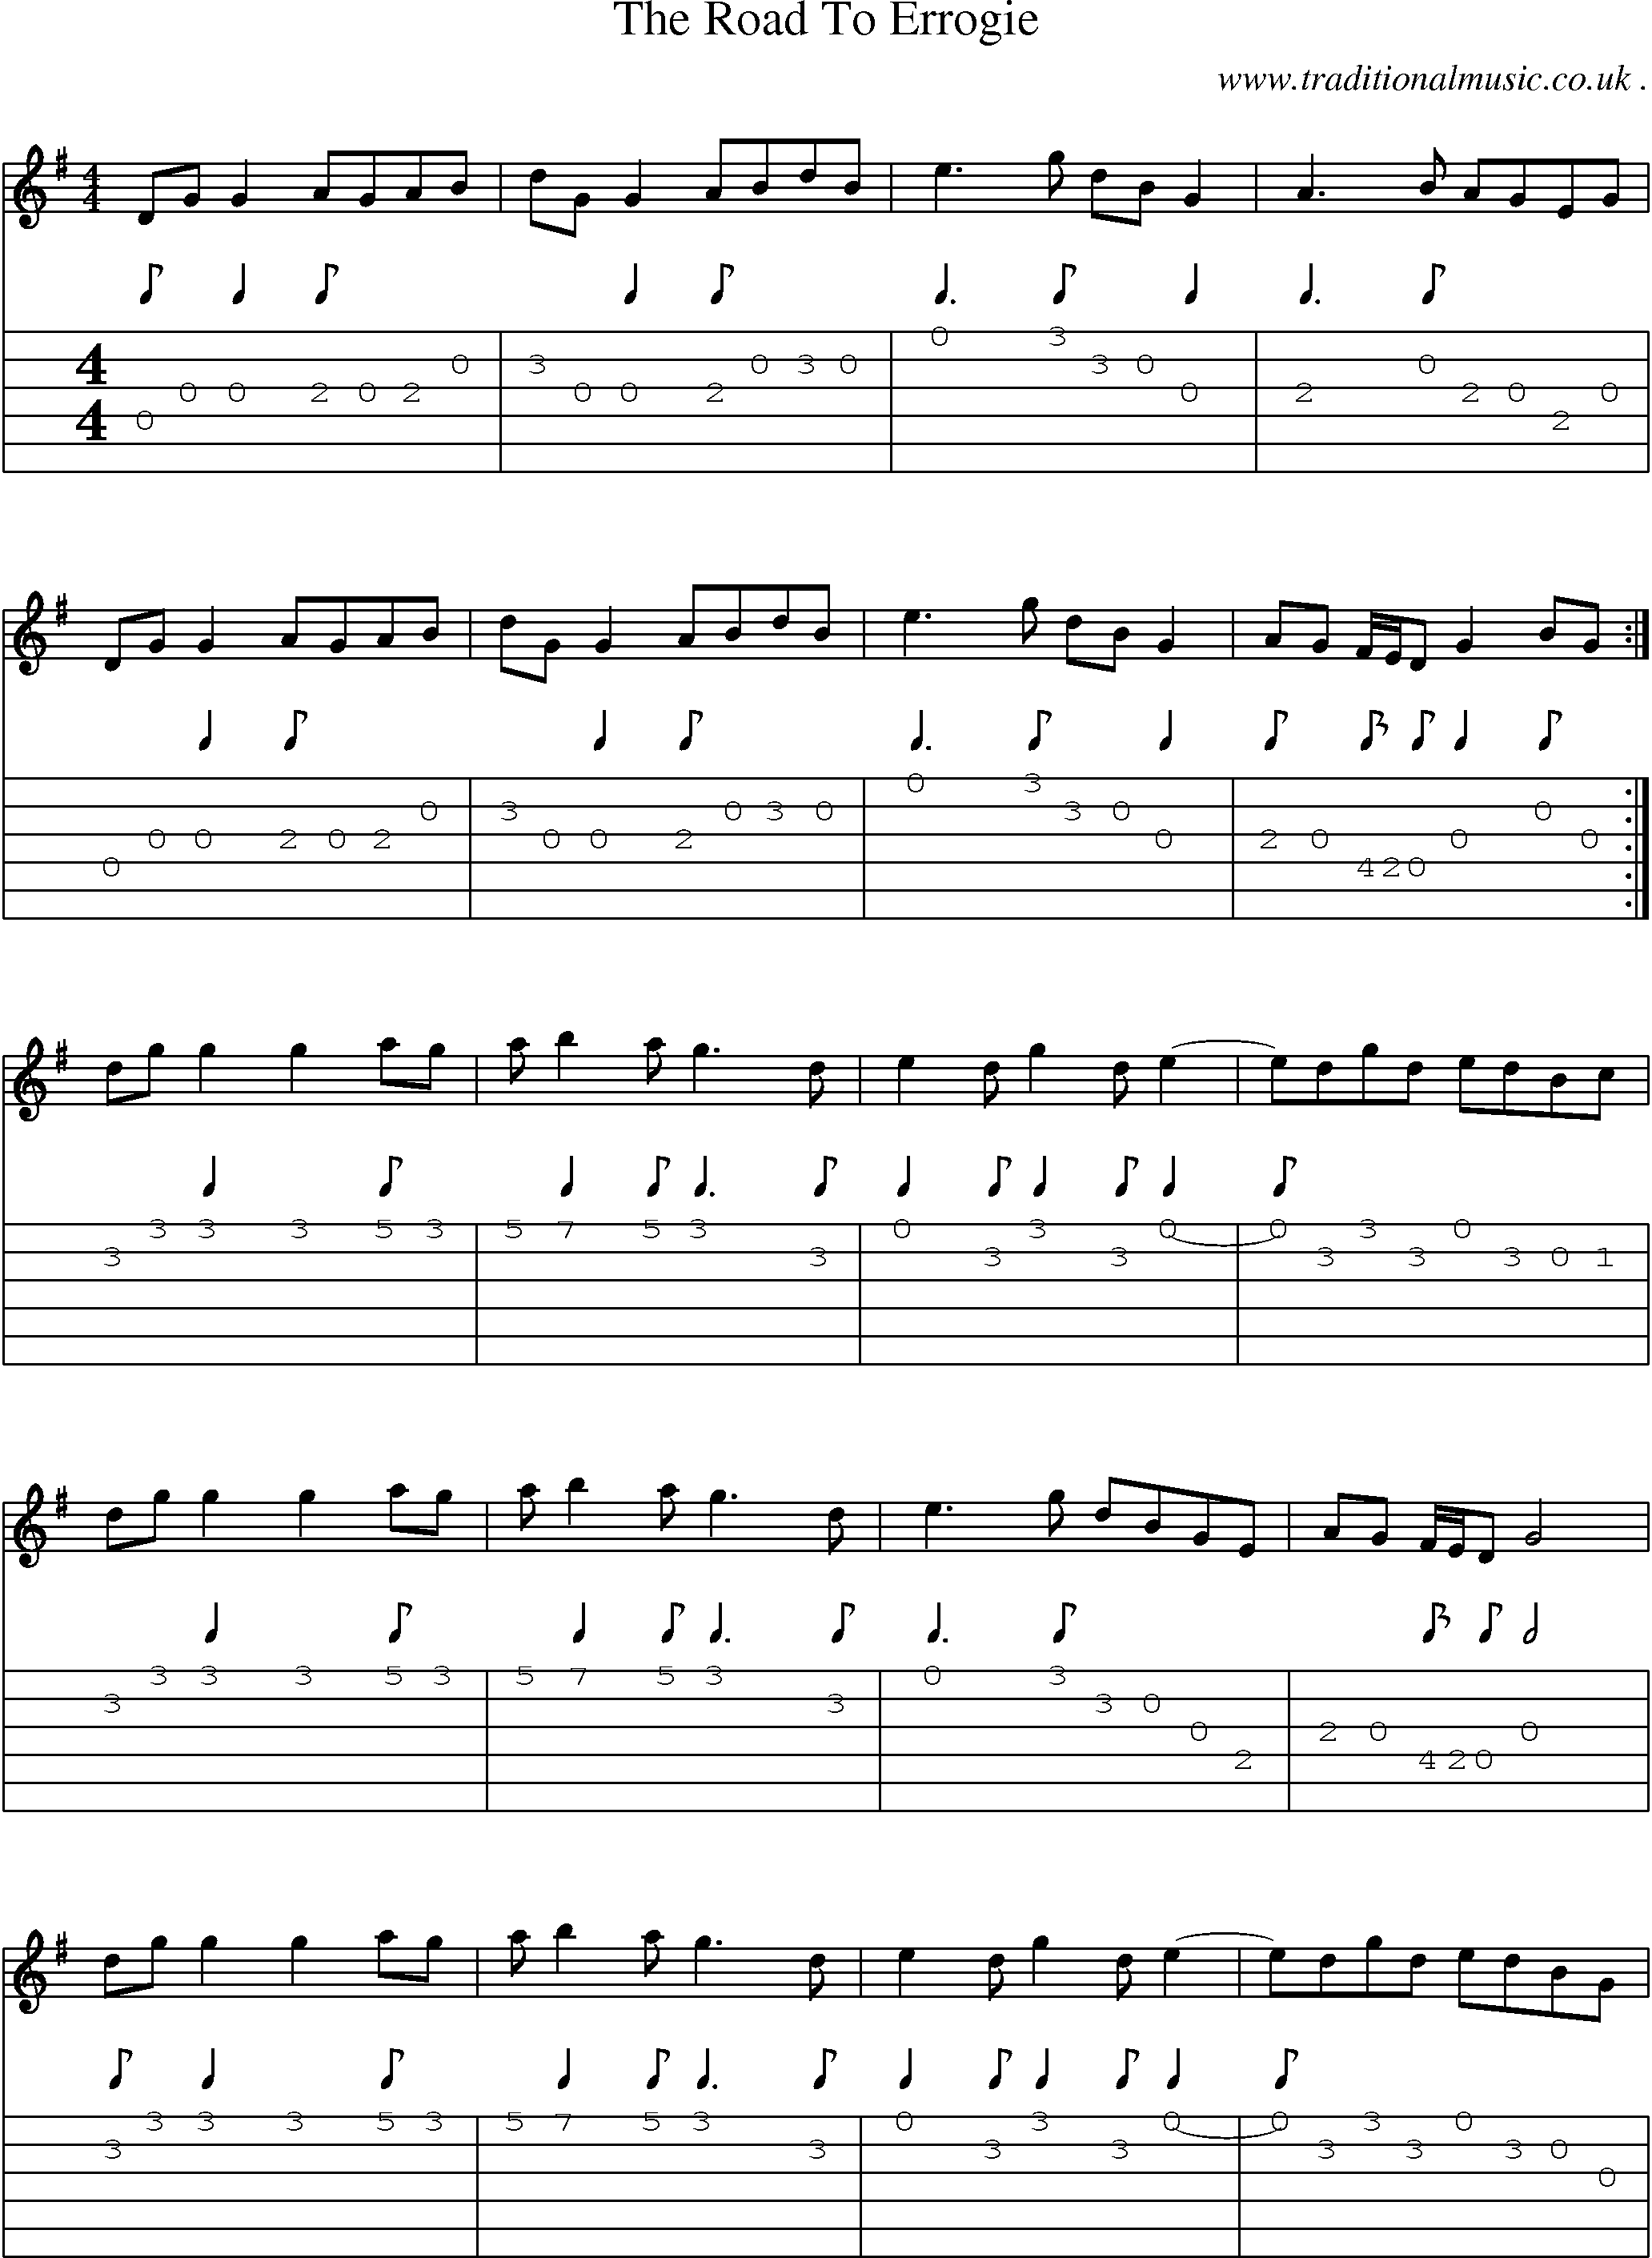 Sheet-Music and Guitar Tabs for The Road To Errogie